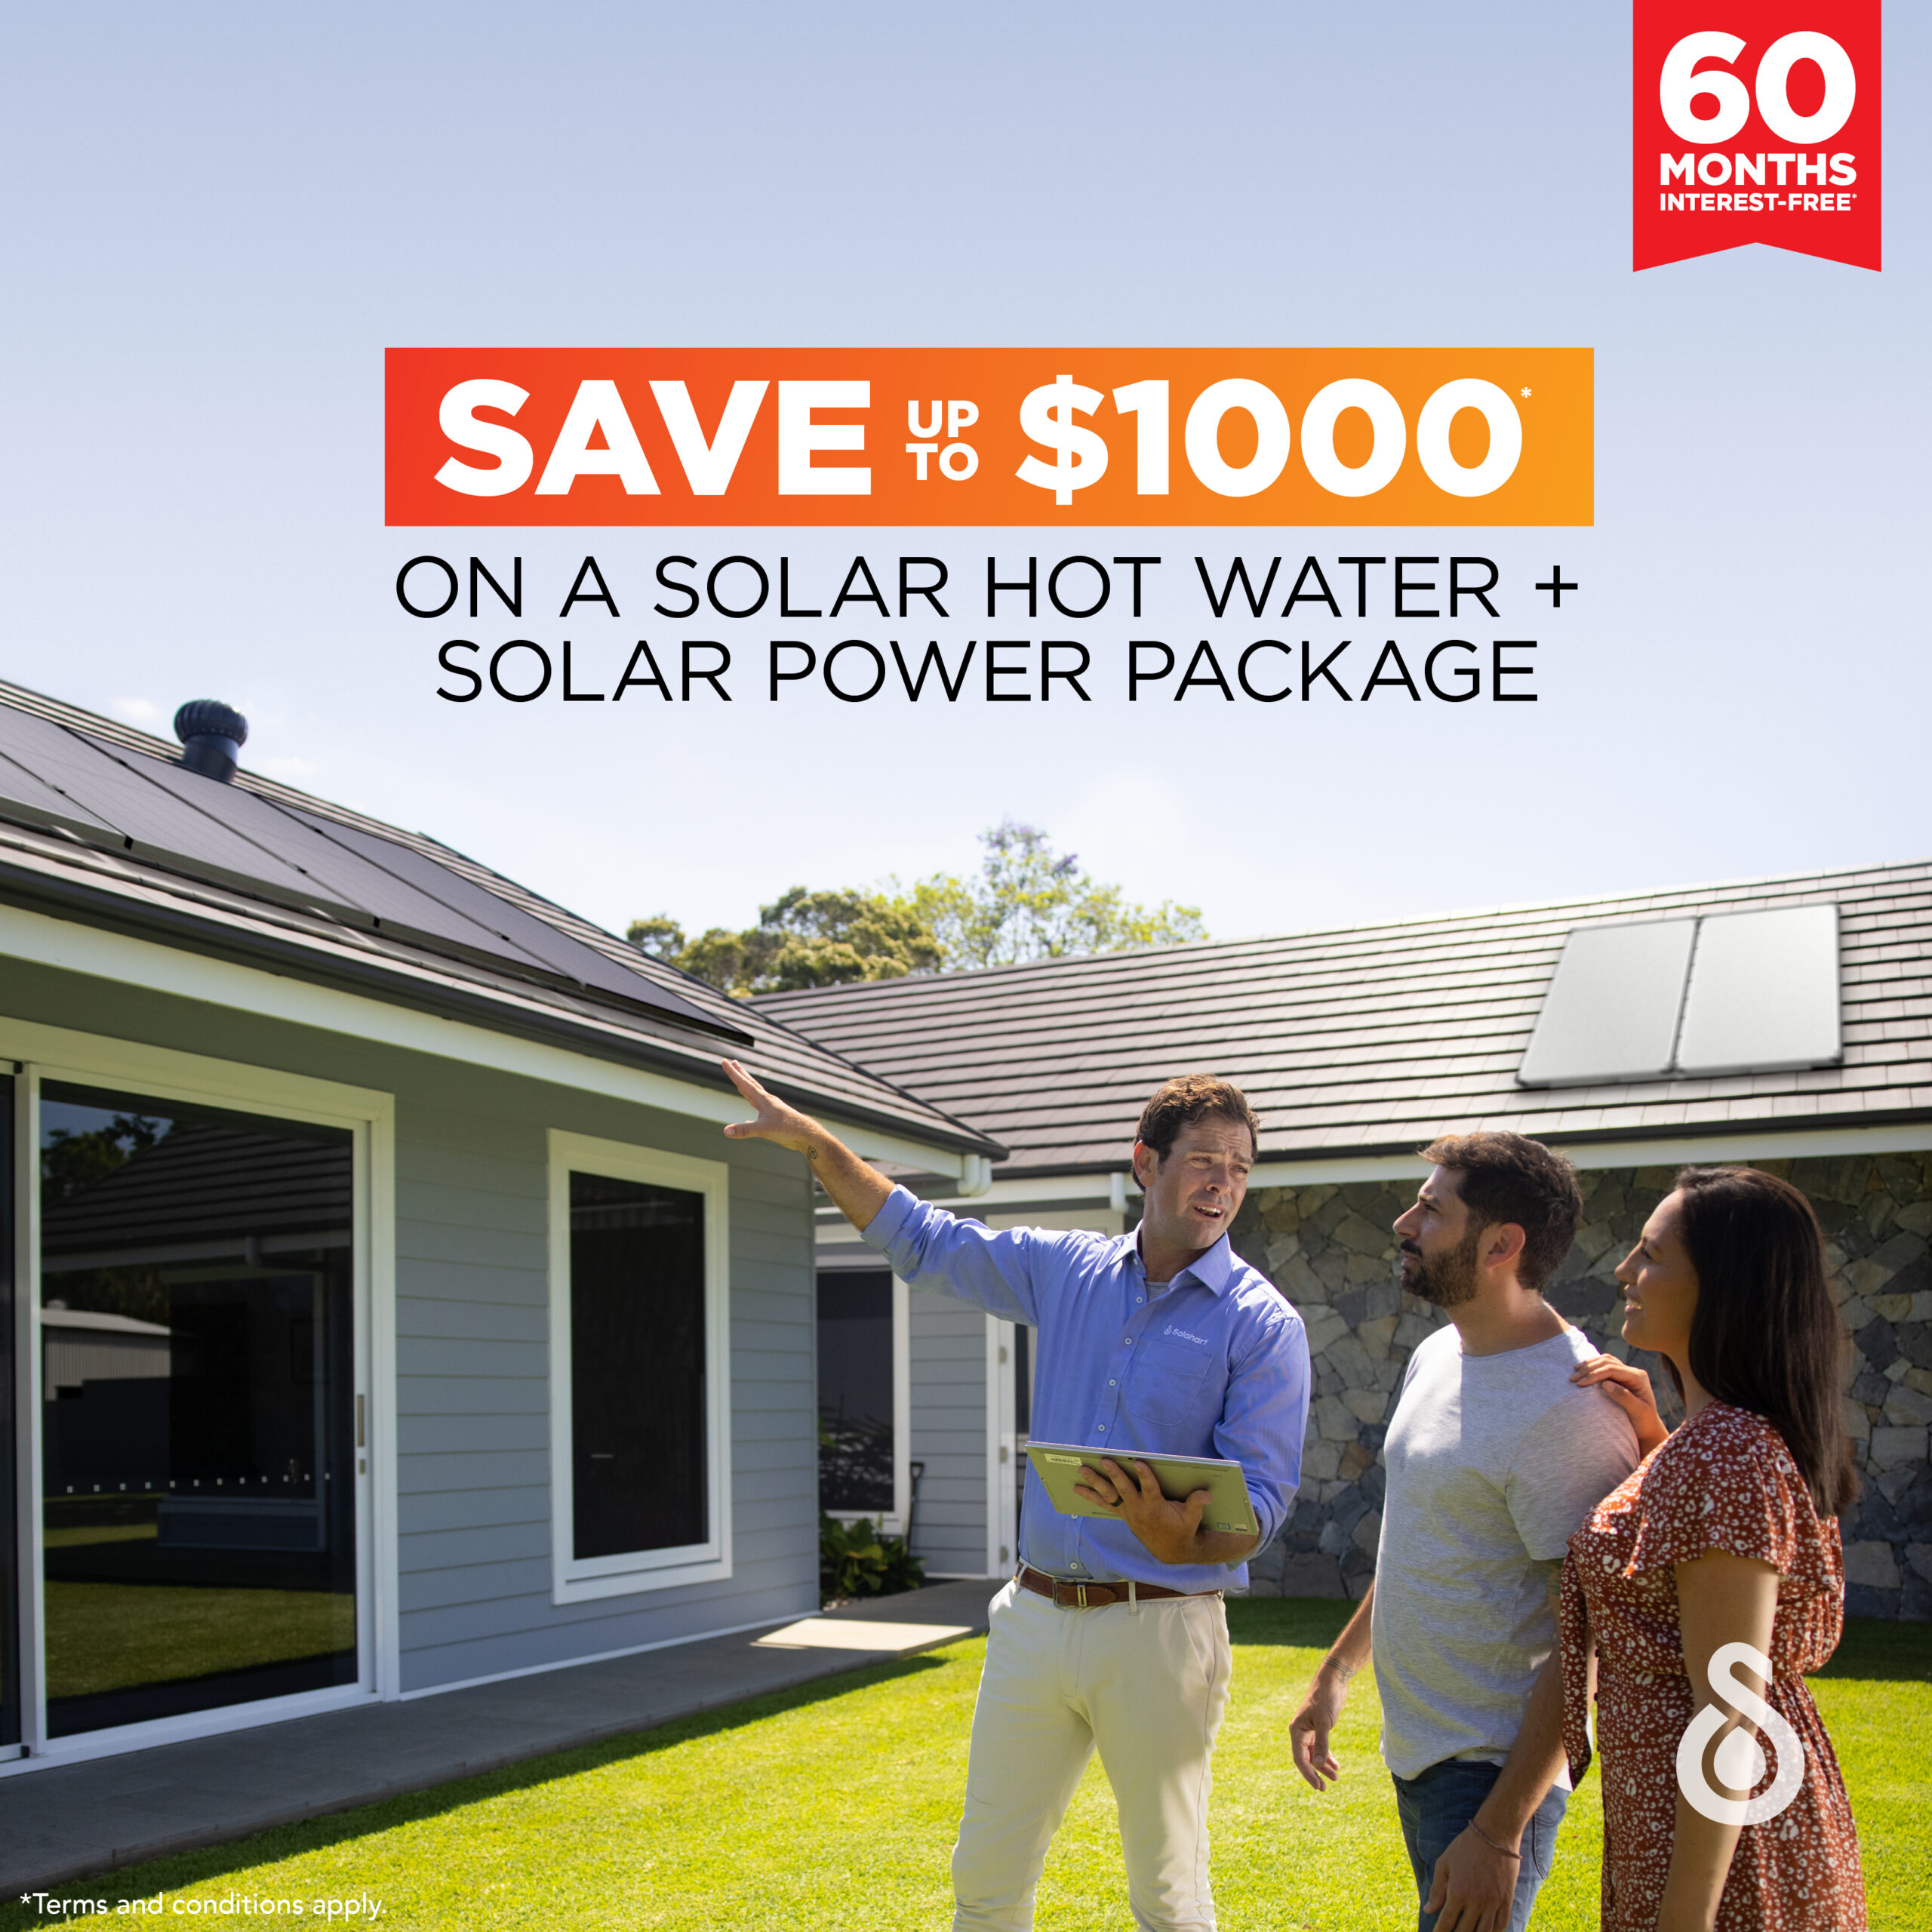 Solahart 60 month interest-free and save up to $1000 on a solar hot water and solar power package/